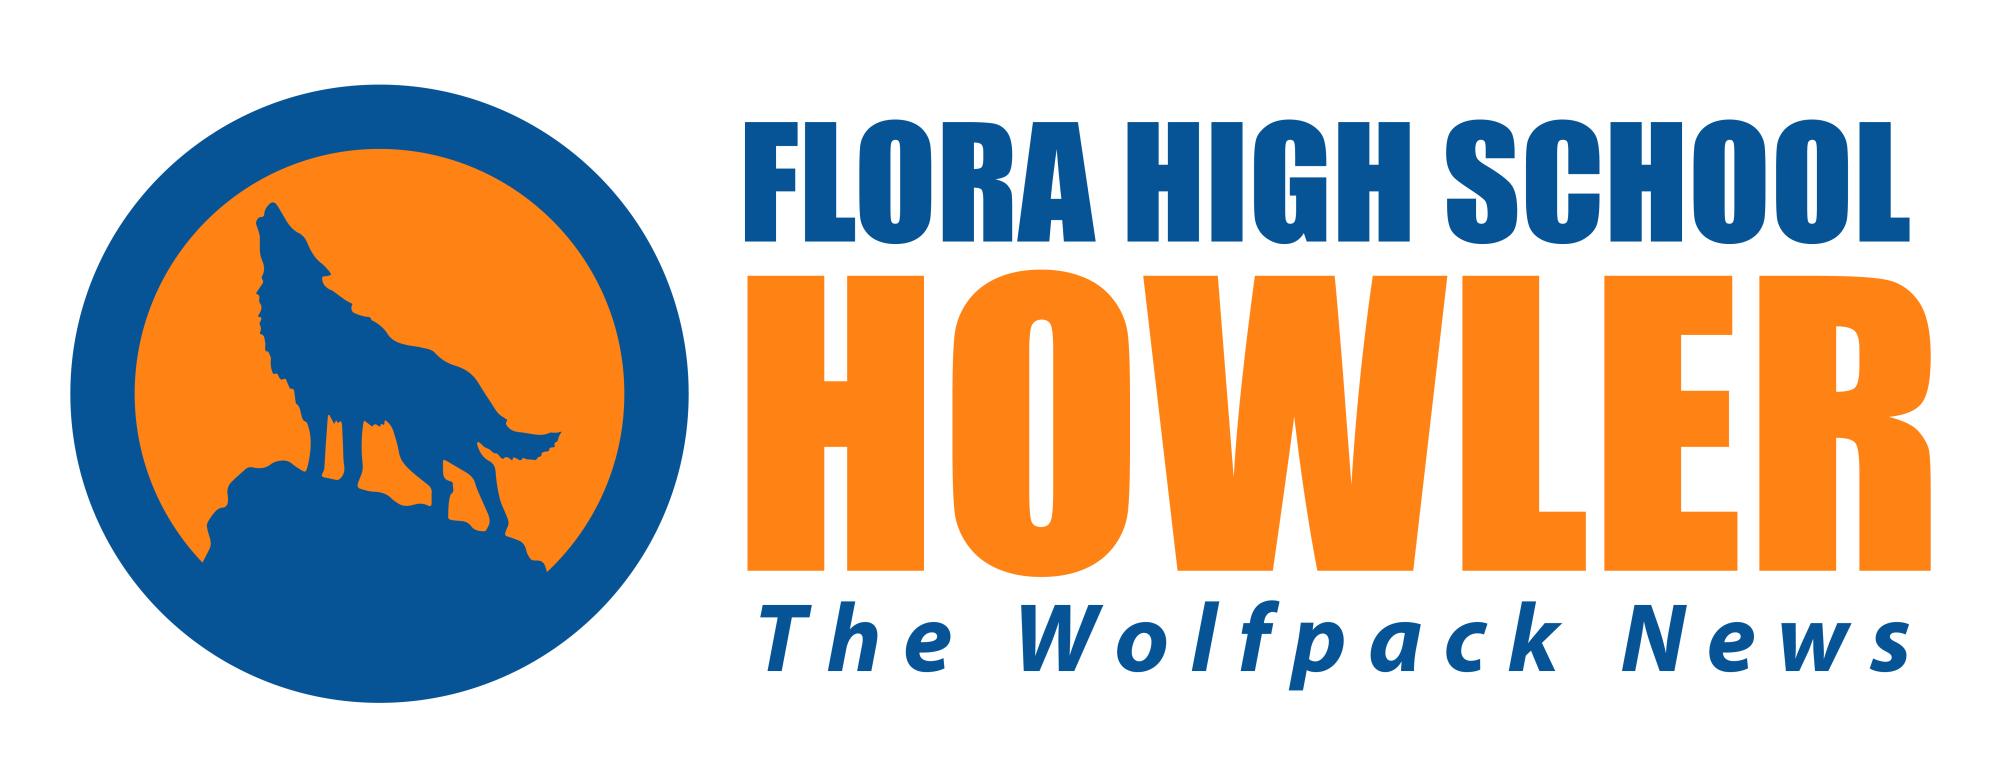 The Student News Site of Flora High School